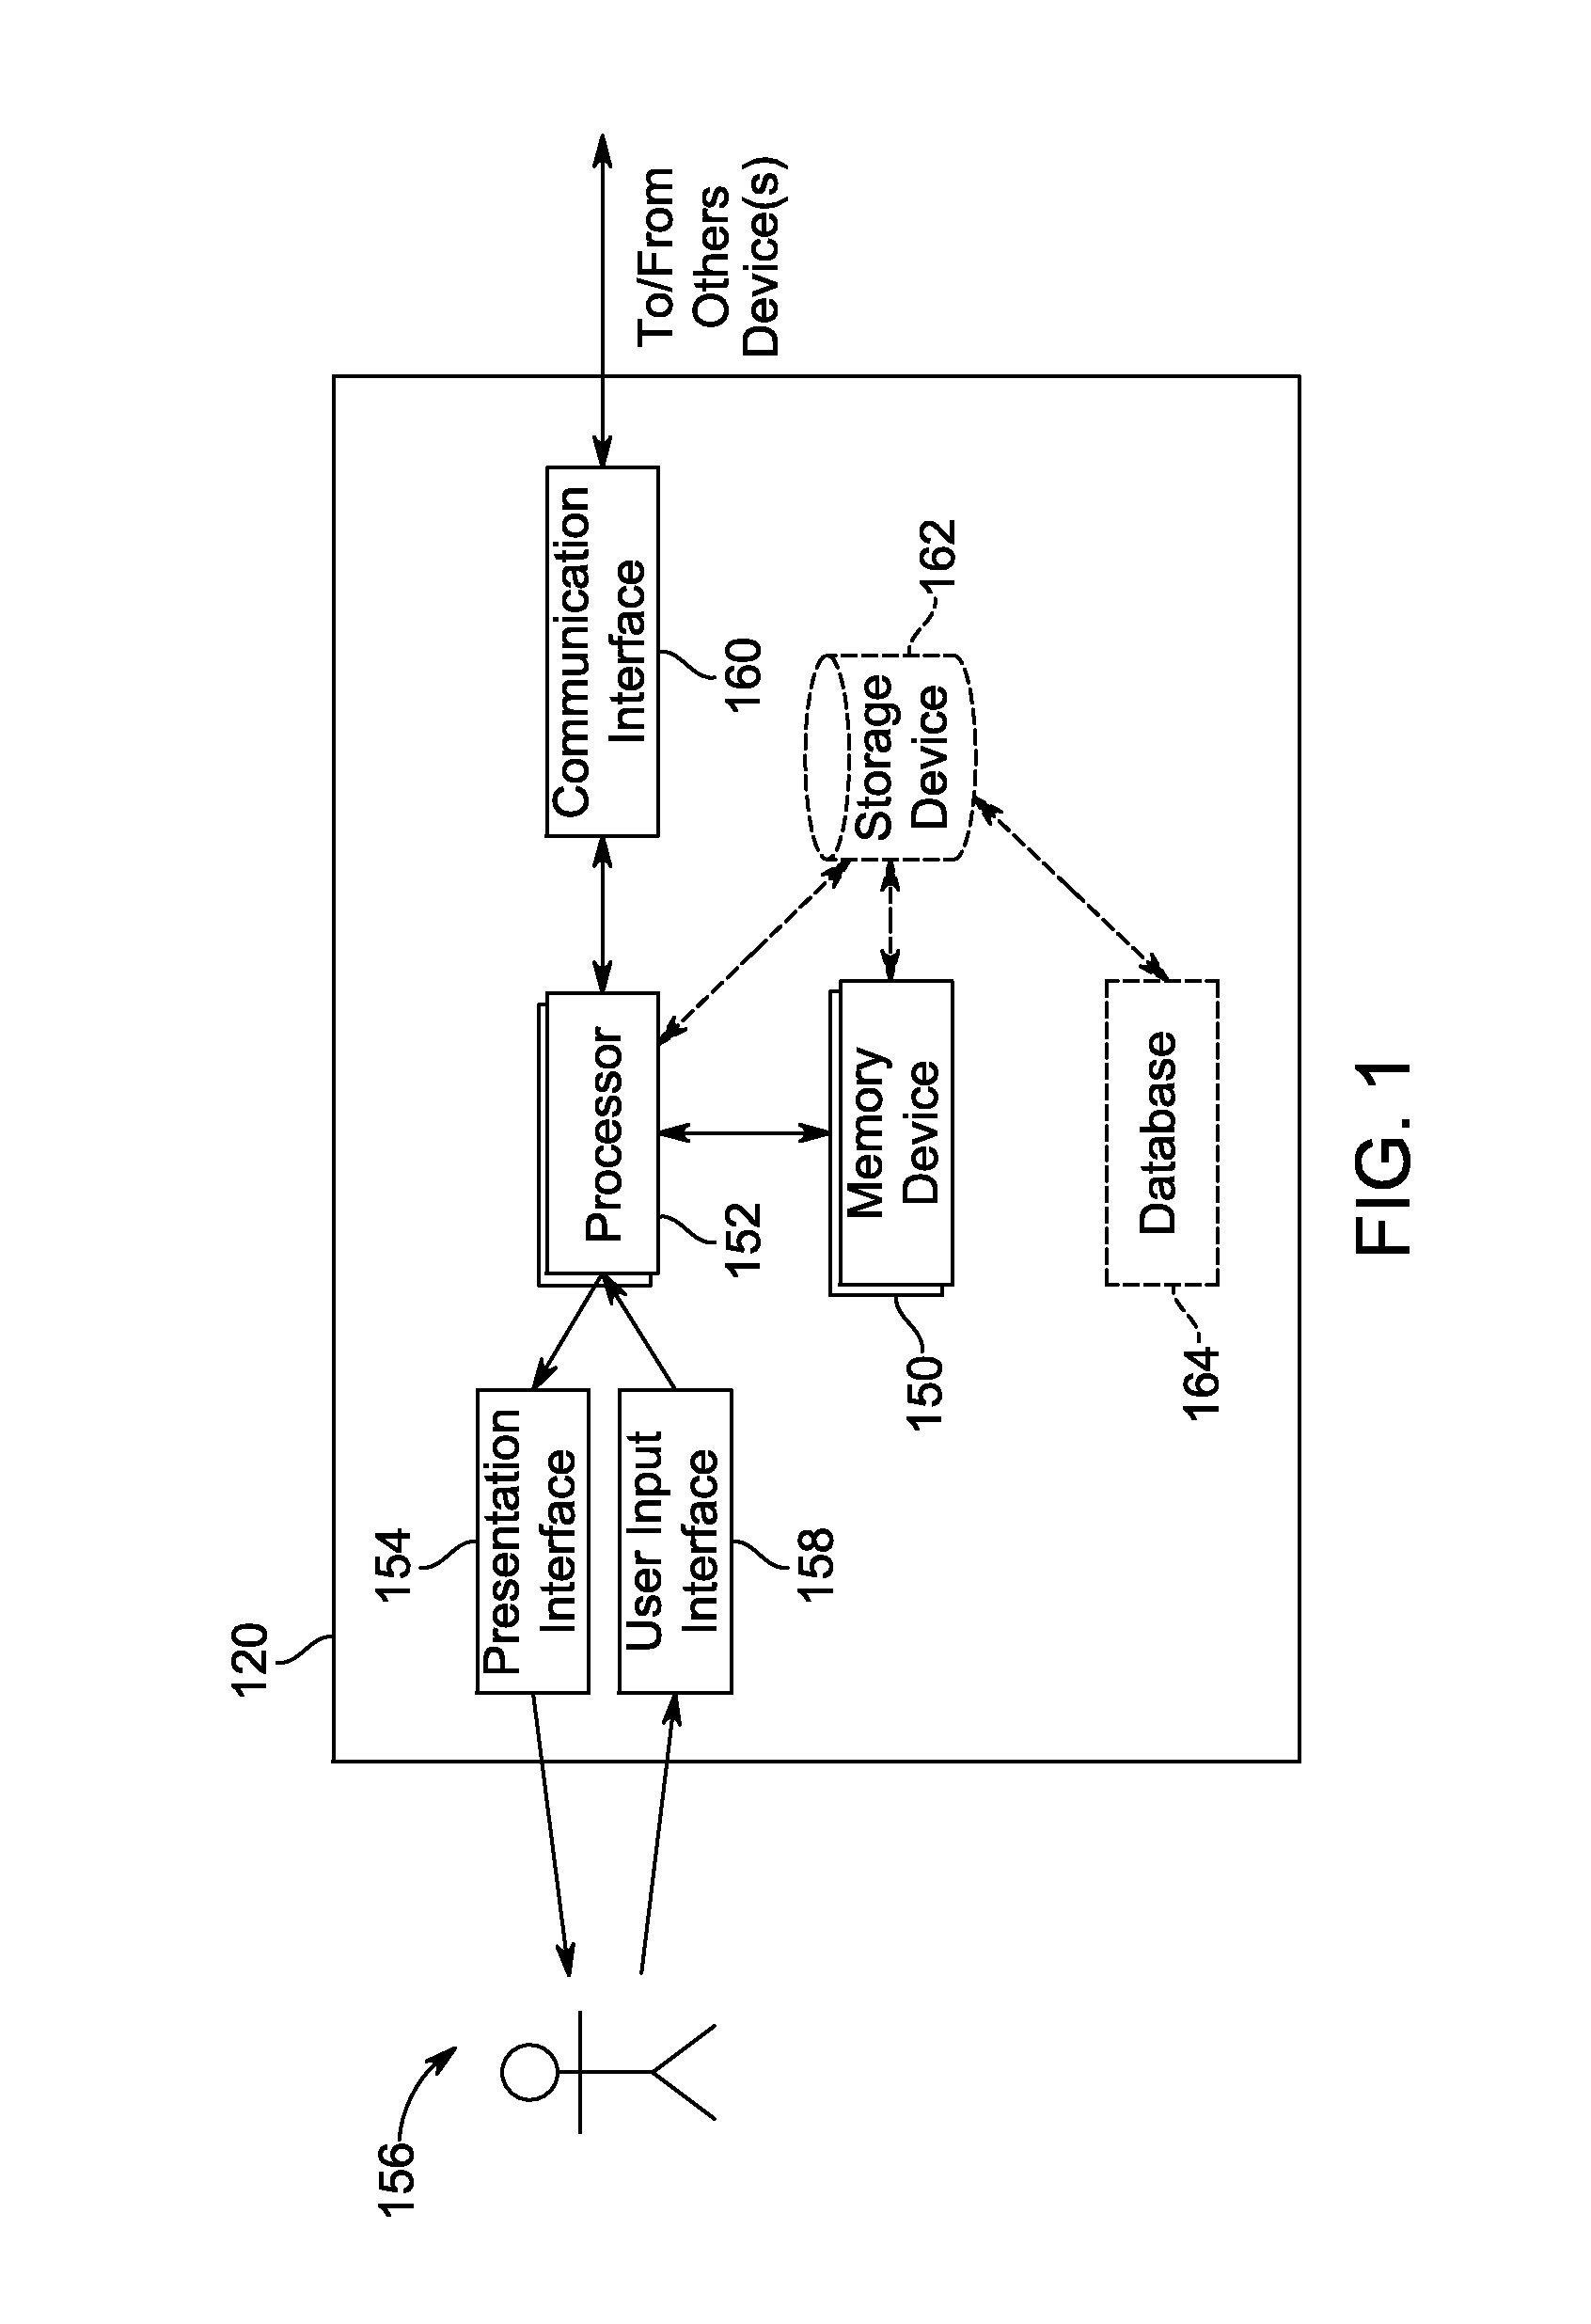 System and method for extracting ontological information from a body of text